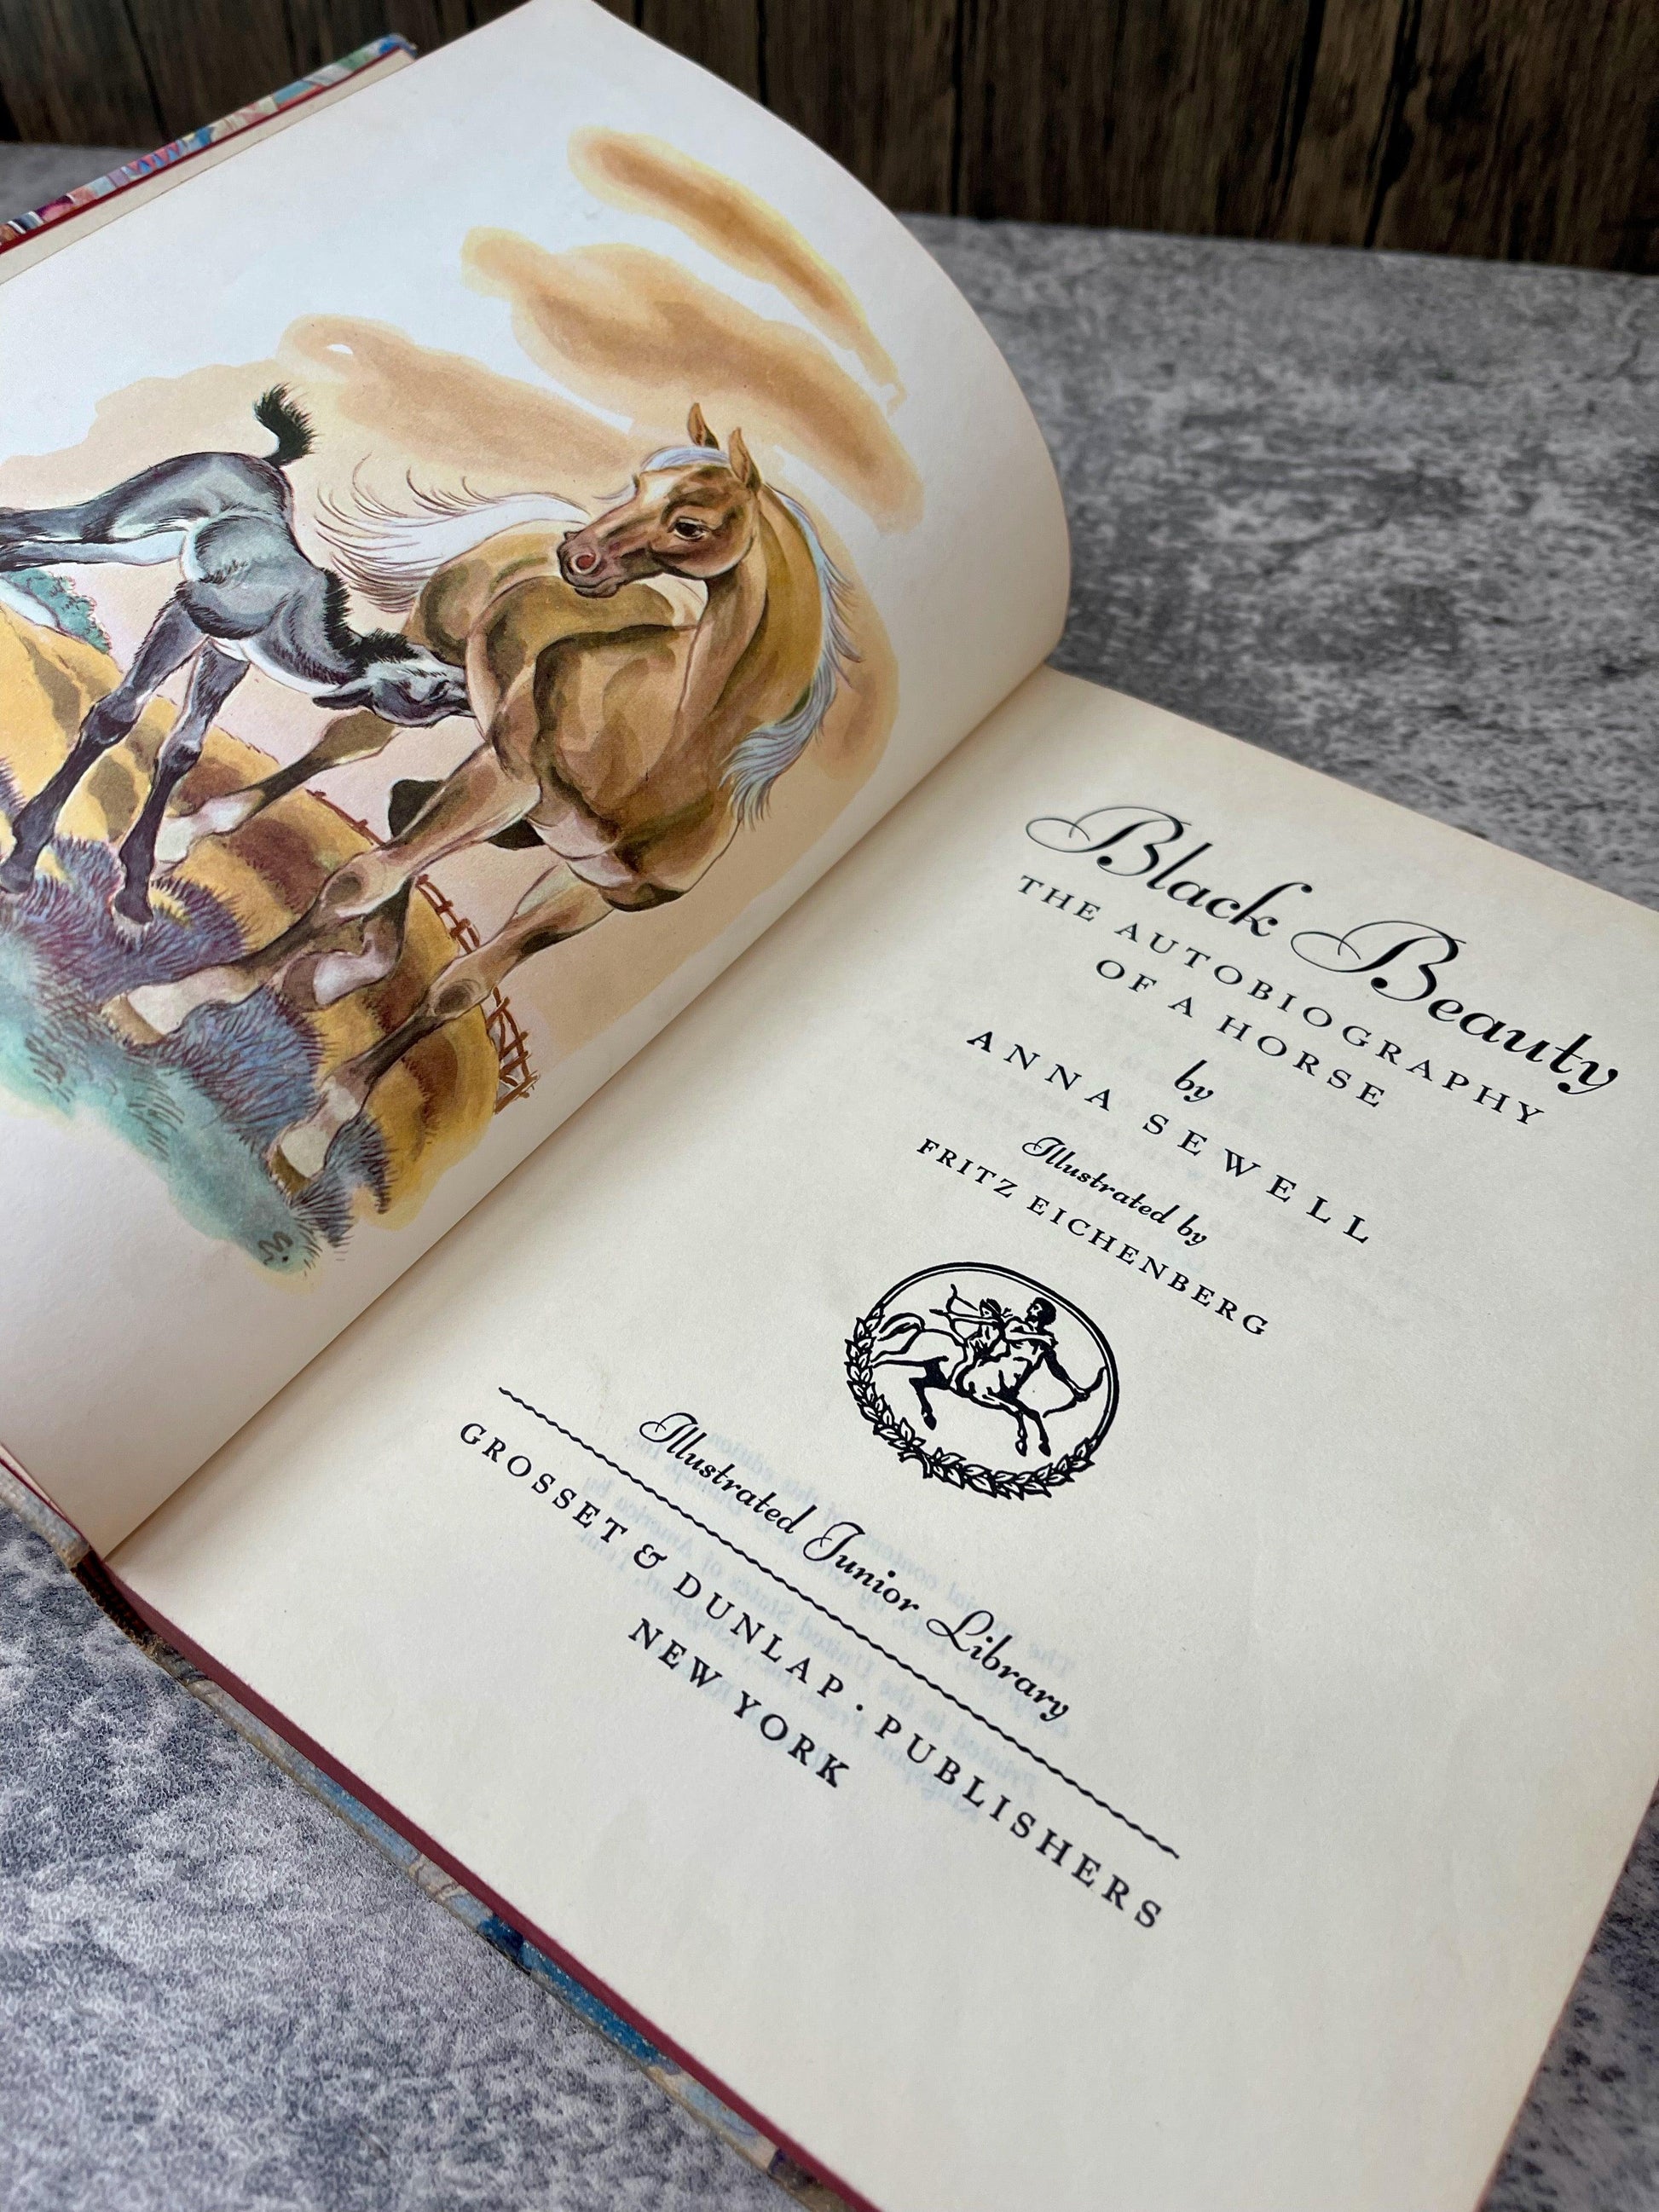 Get your hands on rare edition of Black Beauty - Horse & Hound